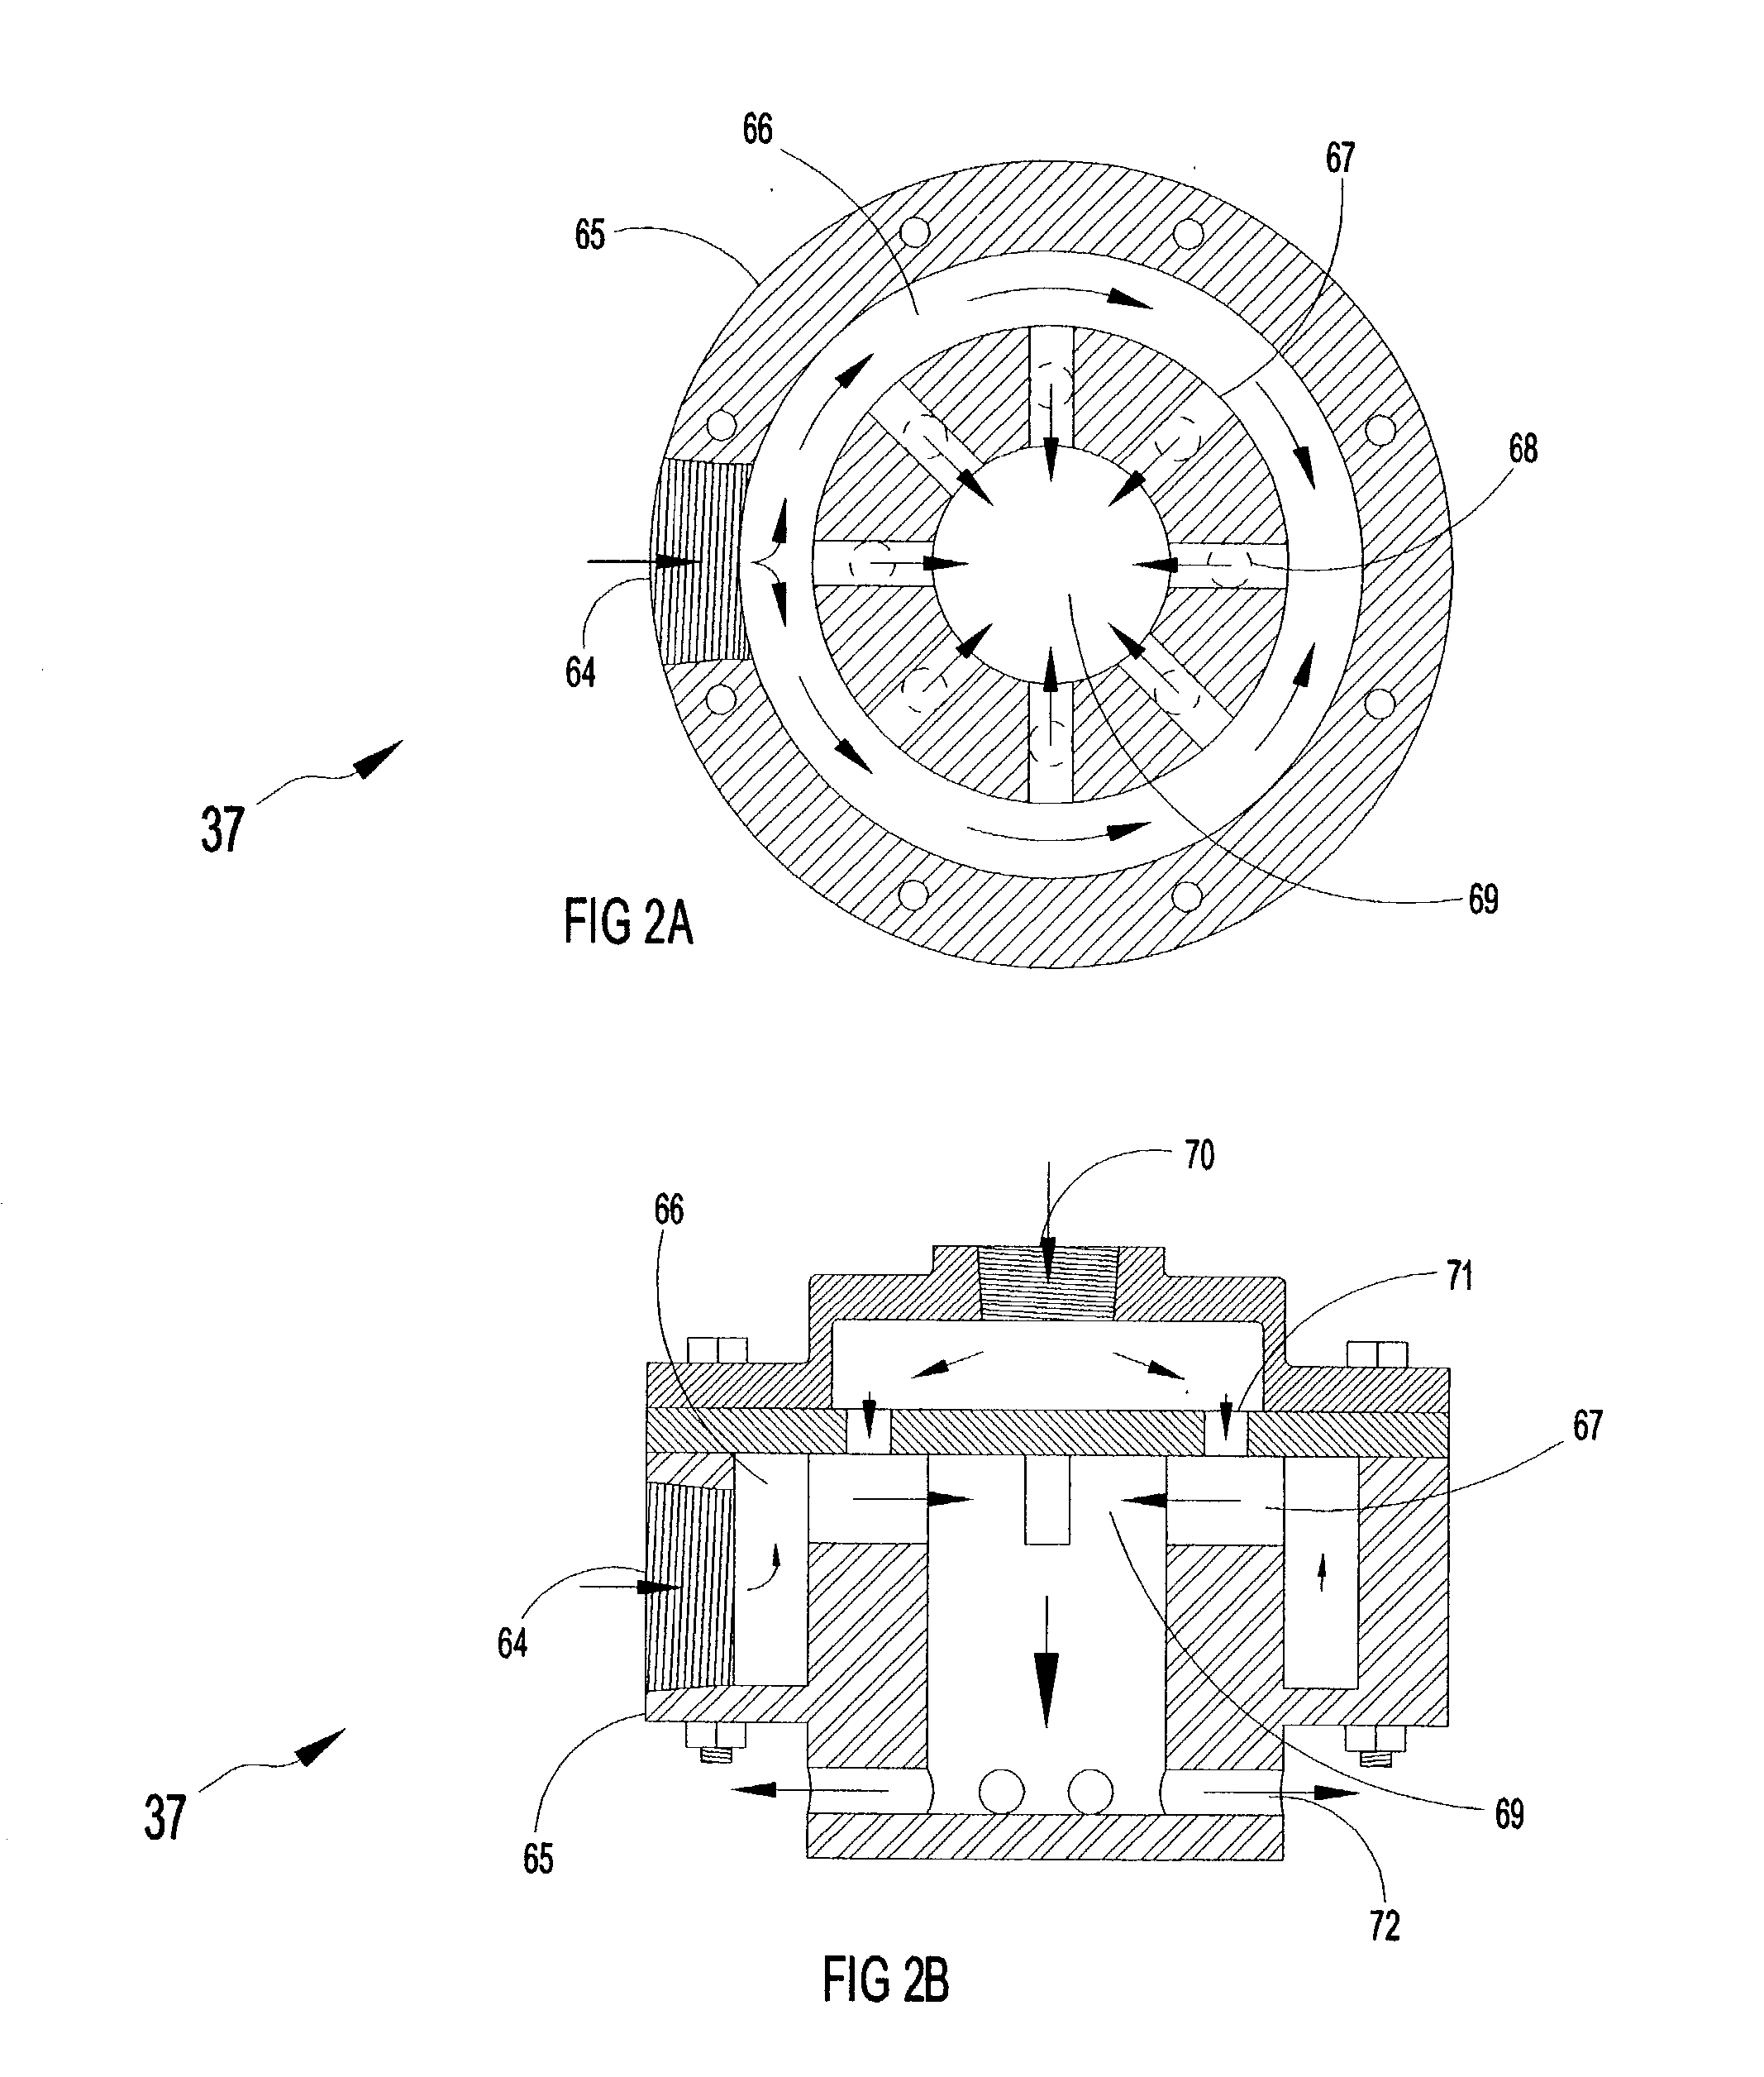 Method and apparatus for treatment of wastewater employing membrane bioreactors